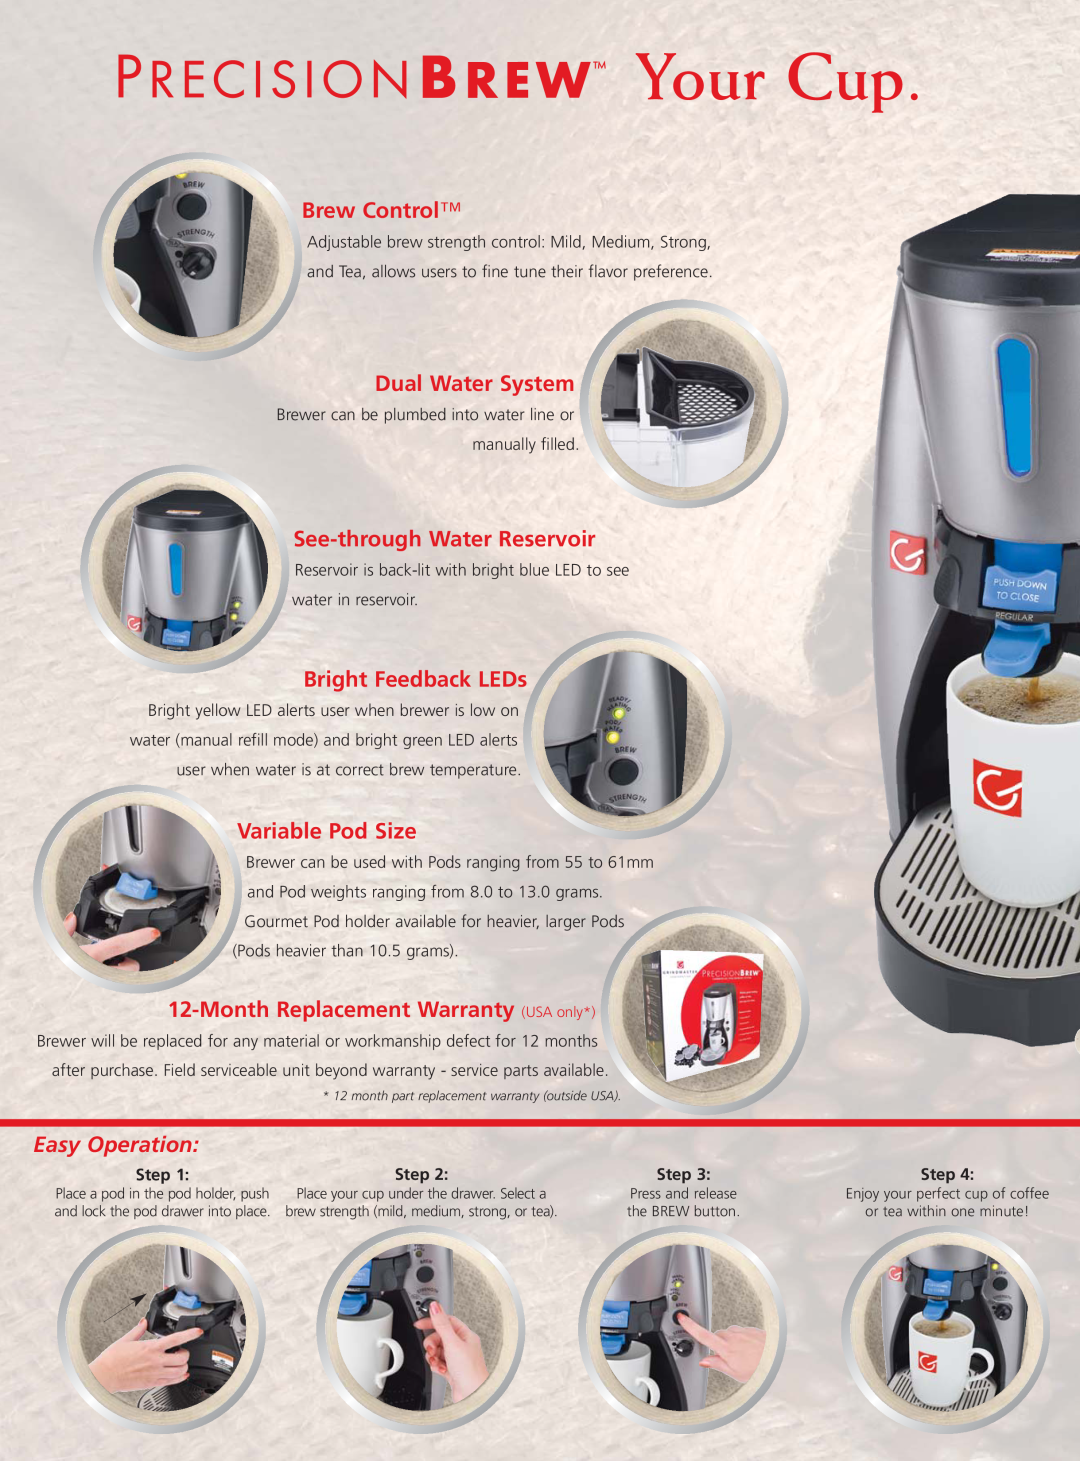 Grindmaster OPOD-E manual Your Cup, Brew Control, Dual Water System, See-throughWater Reservoir, Bright Feedback LEDs, Step 